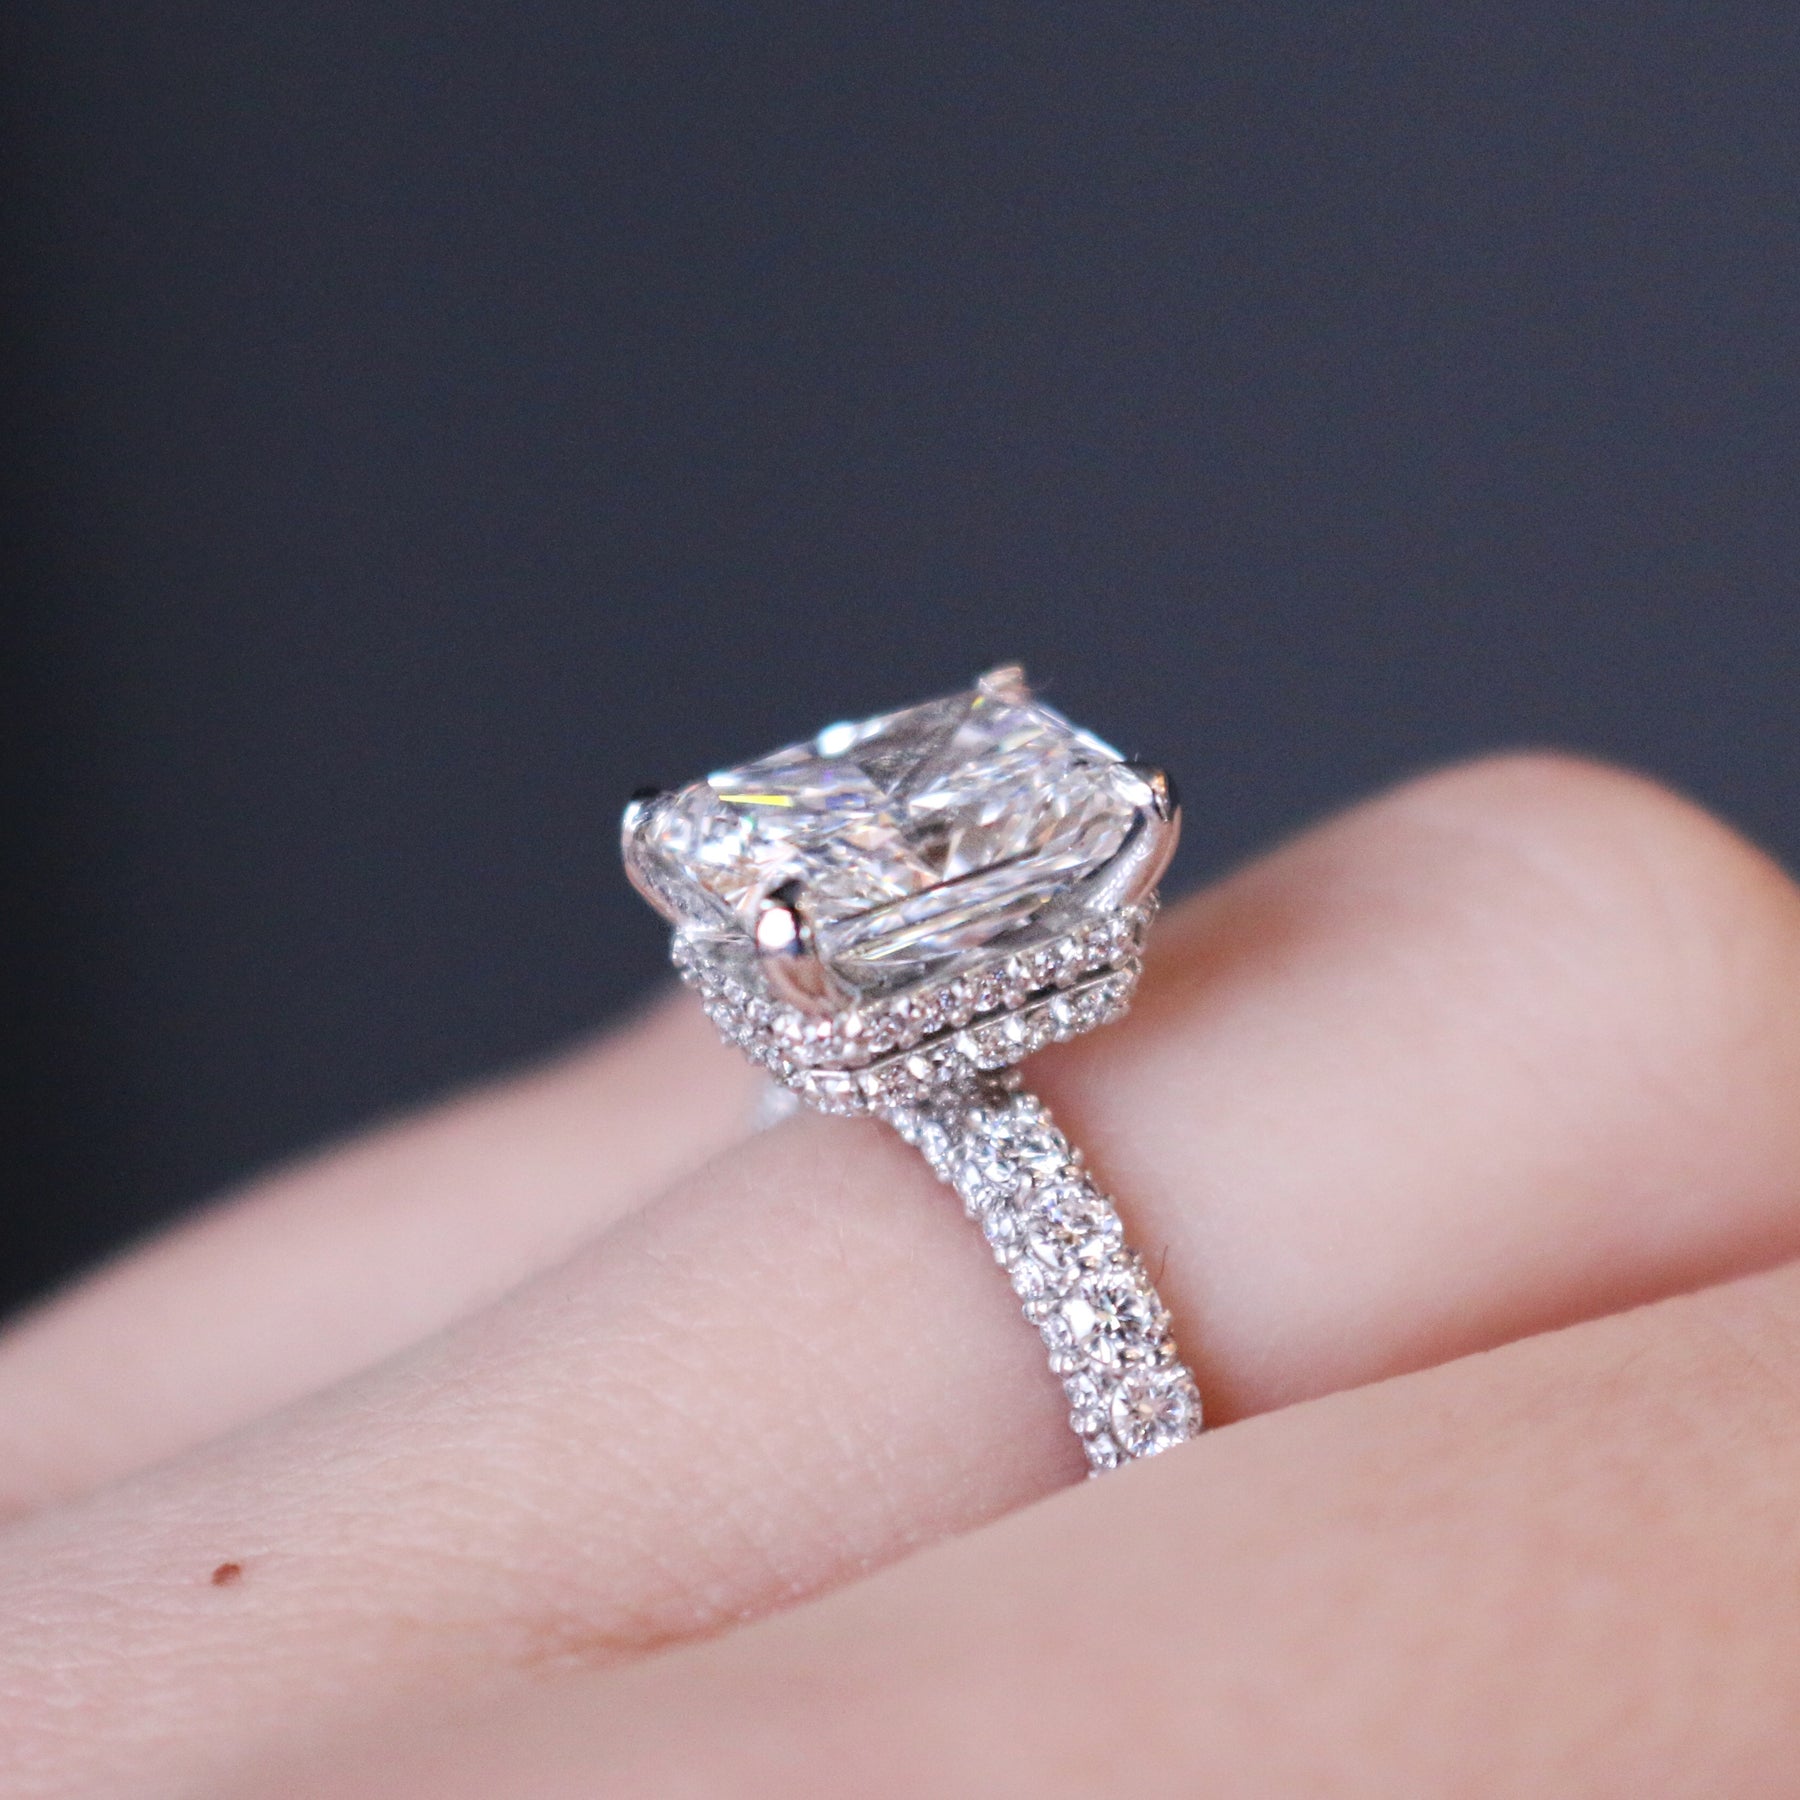 How to Buy an Engagement Ring: Diamond Ring Shopping Guide | Money